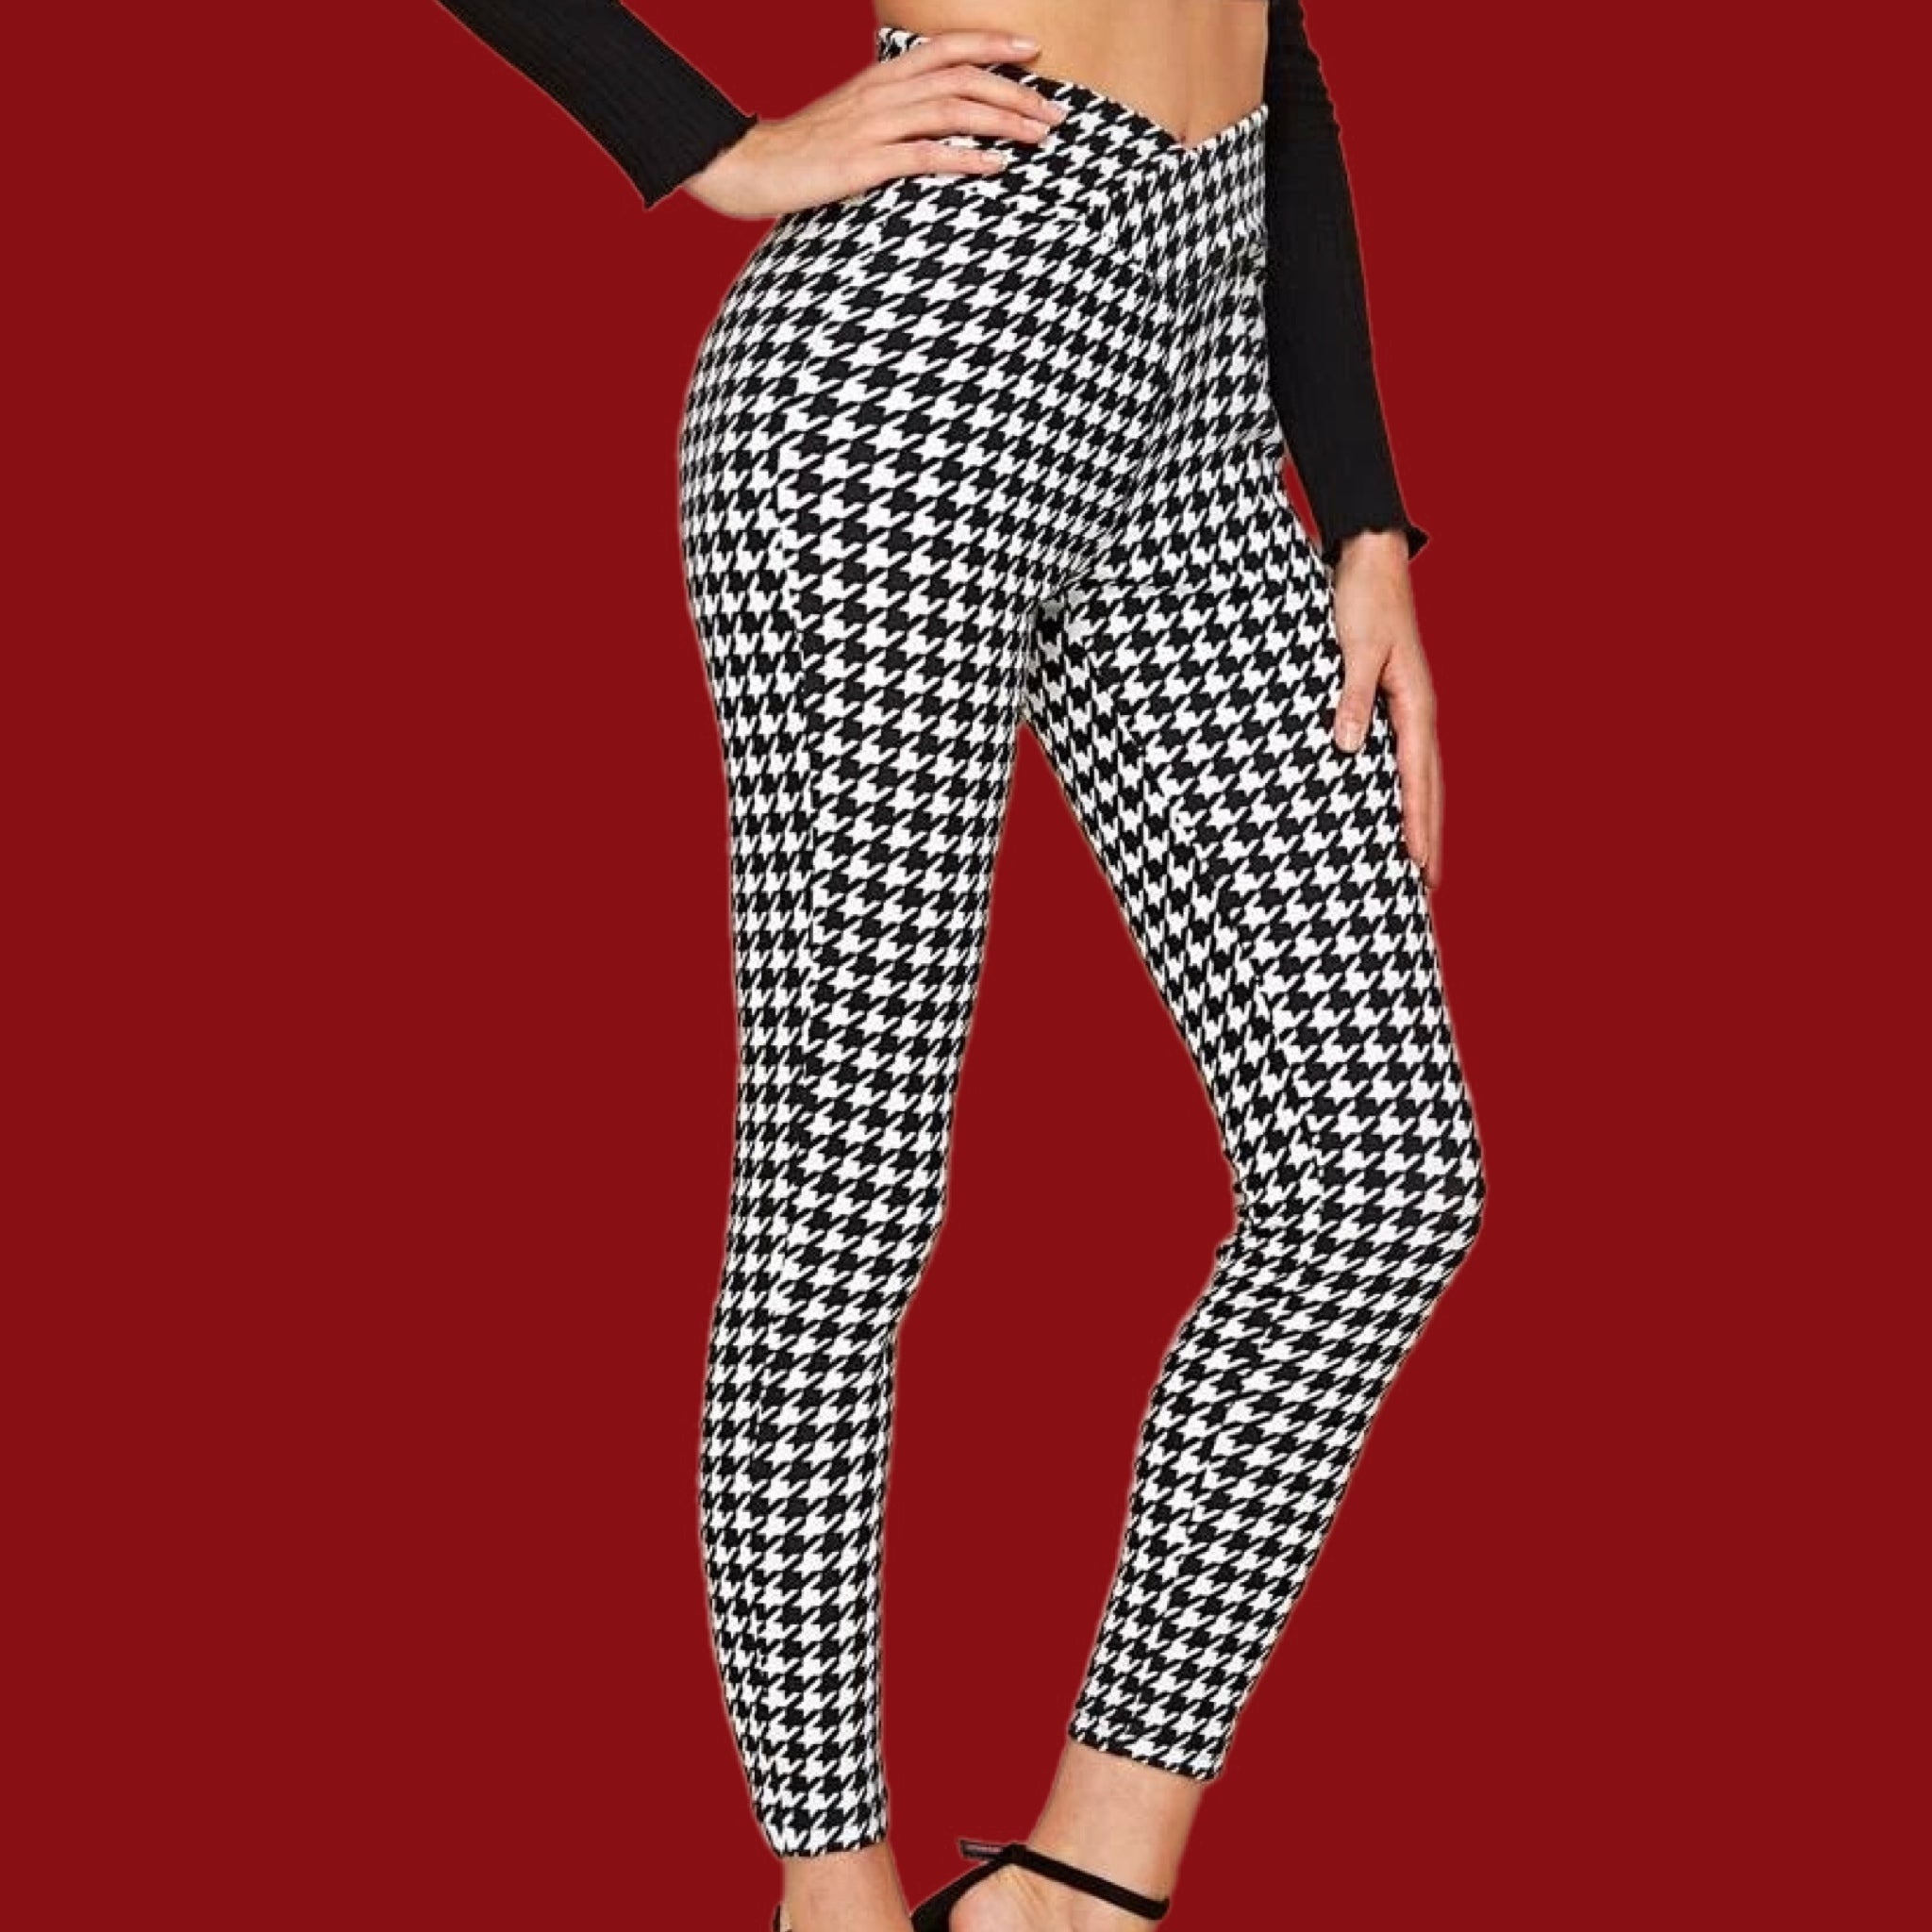 Black and White Houndstooth Silky Leggings – Just Your Average Gal